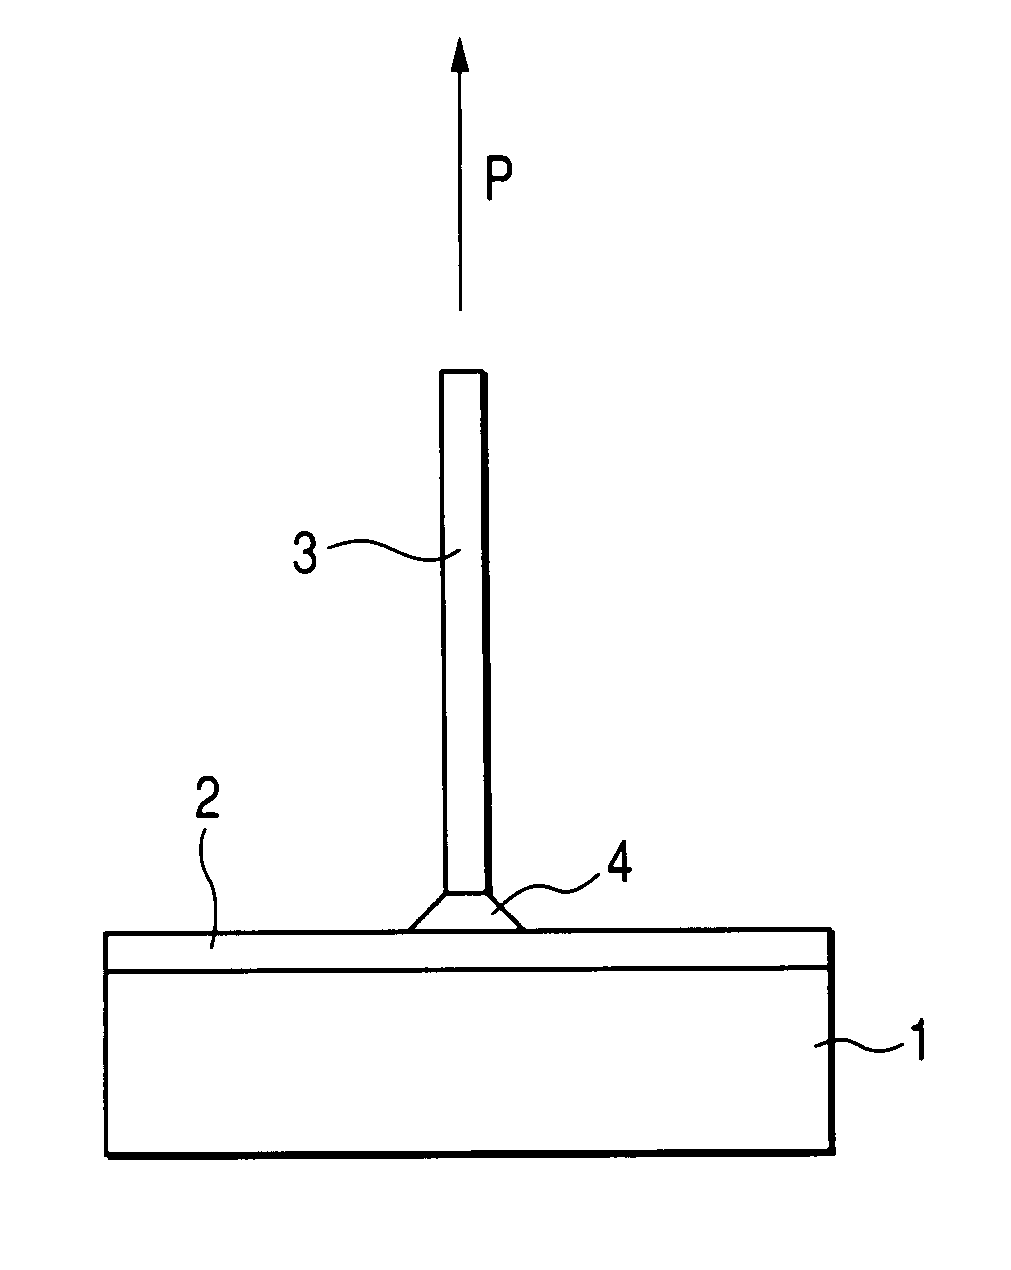 Plasma resistant member, manufacturing method for the same and method of forming a thermal spray coat